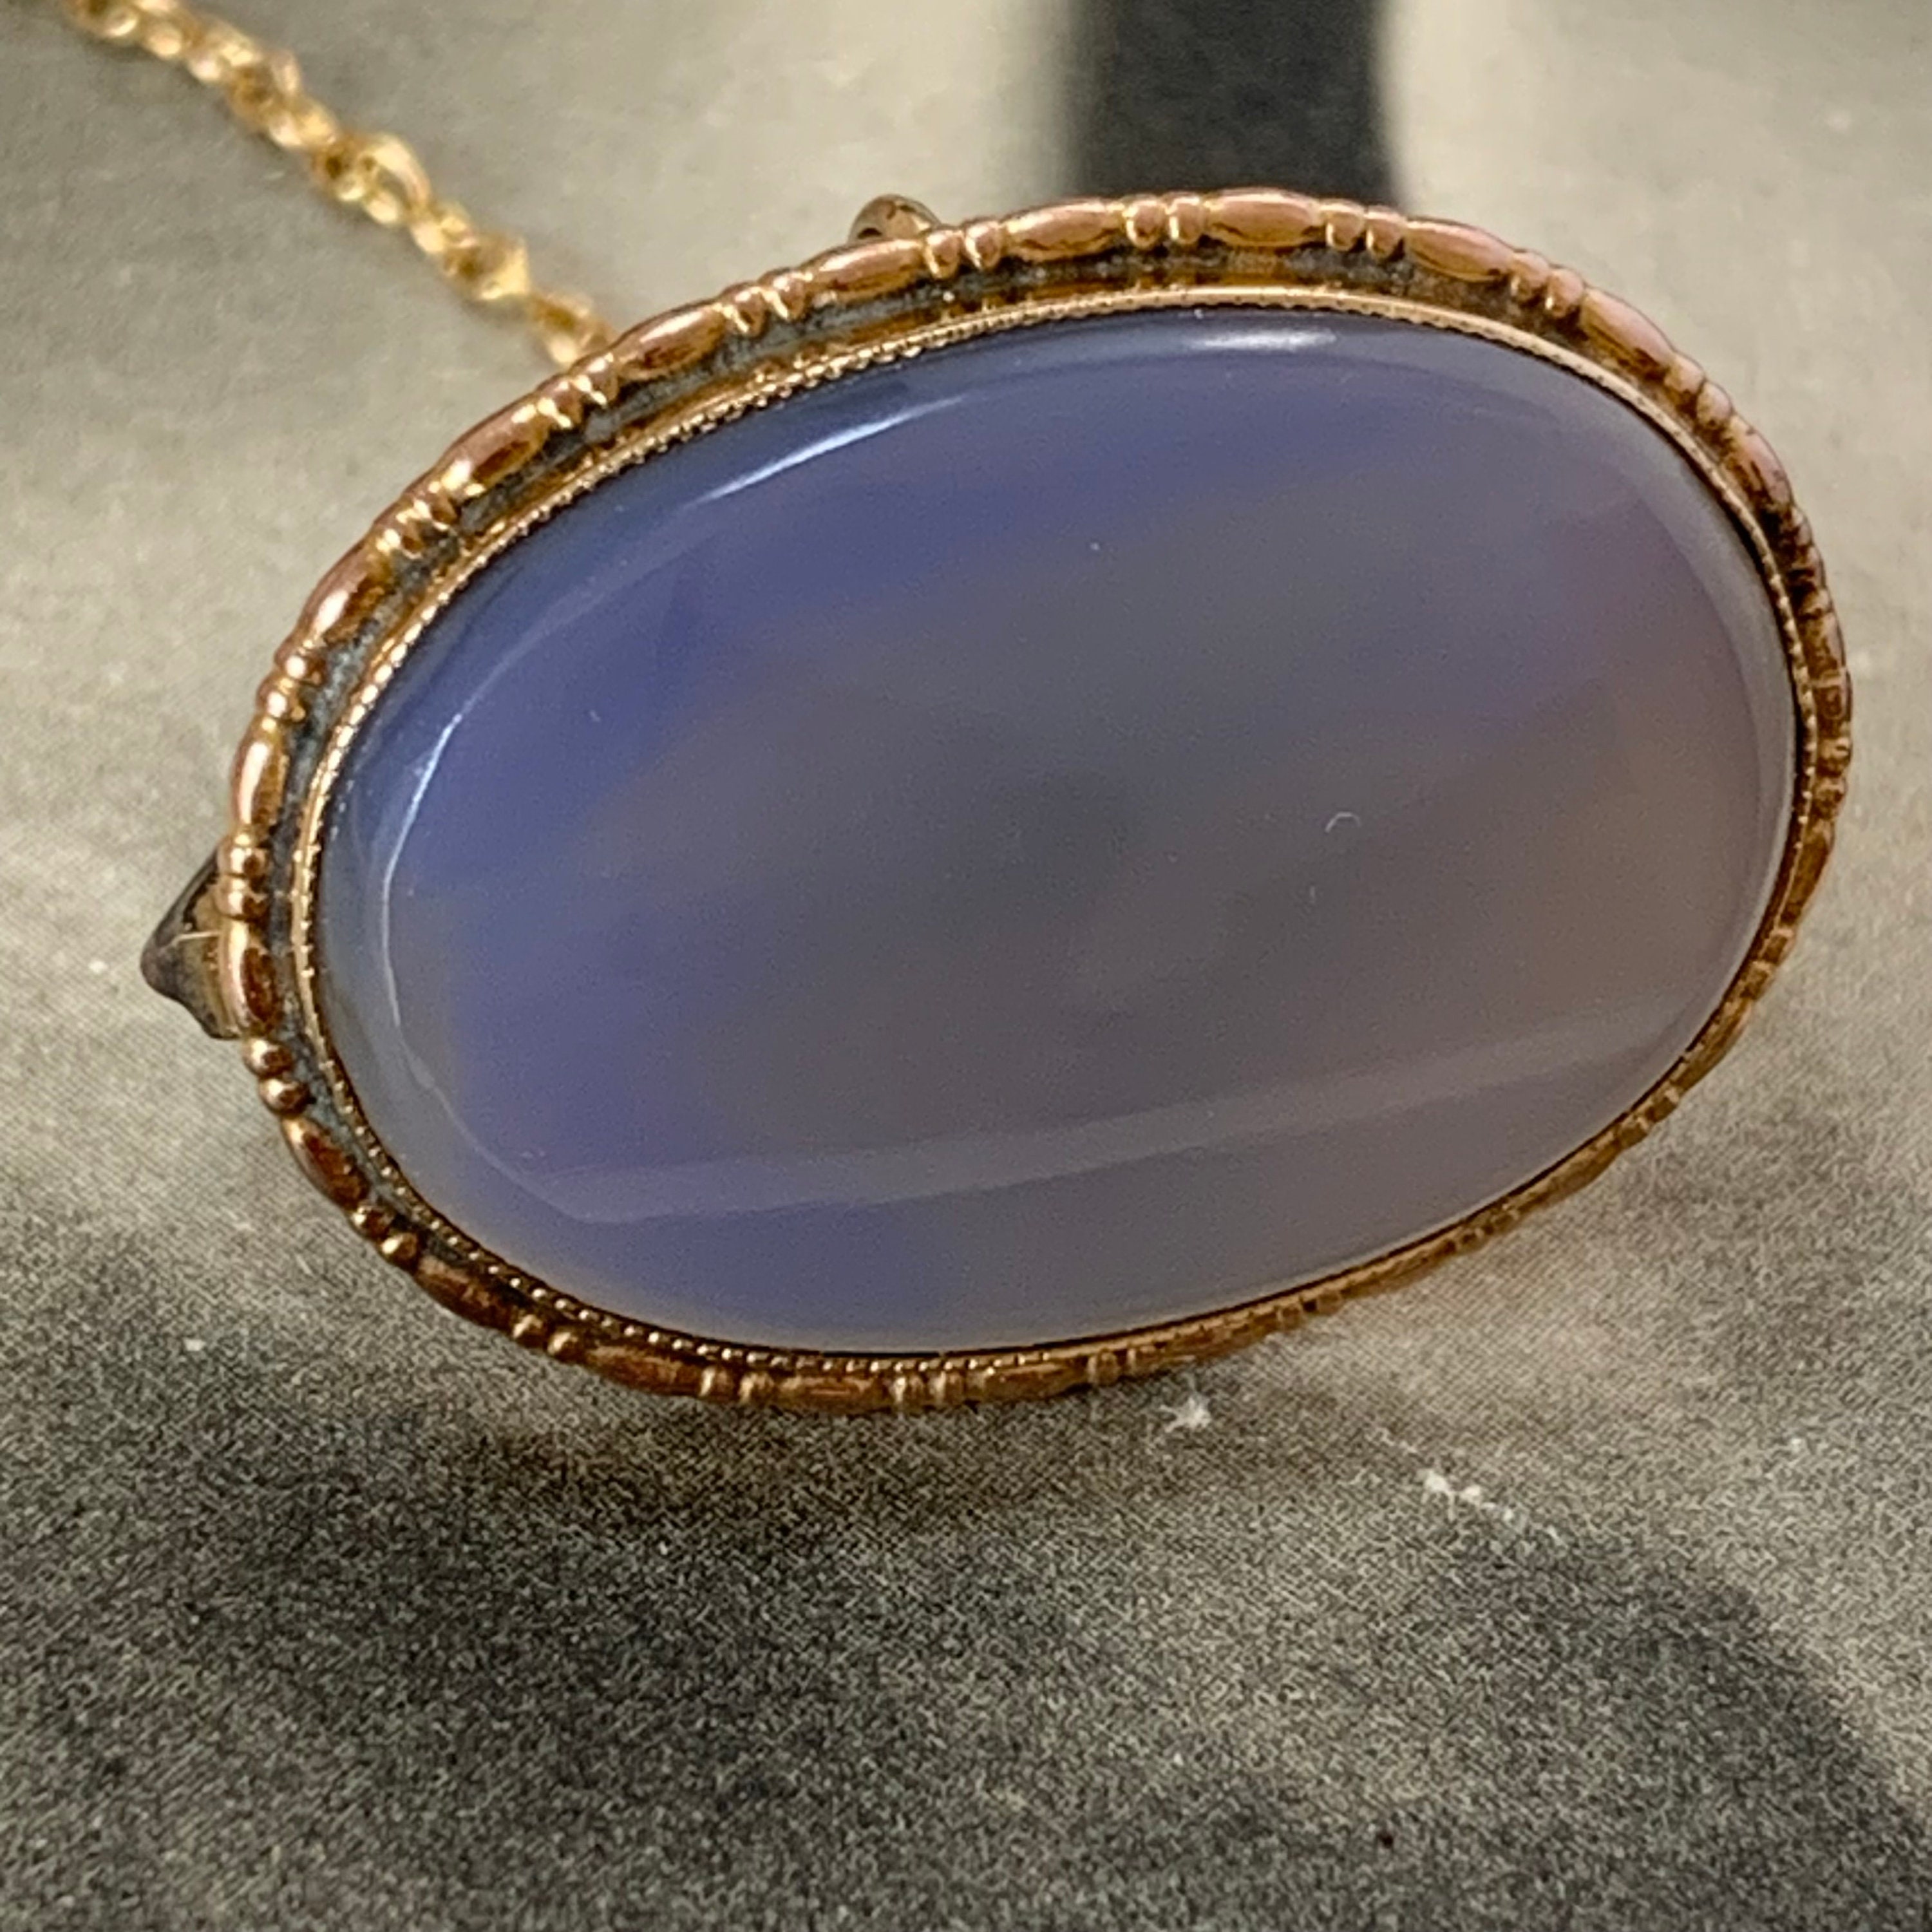 Enchanting Victorian 9Ct Gold Chalcedony Brooch. Blue Gemstone Skilfully Bezel-Set Within A Delicate Beaded Detail Mount & Safty Chain